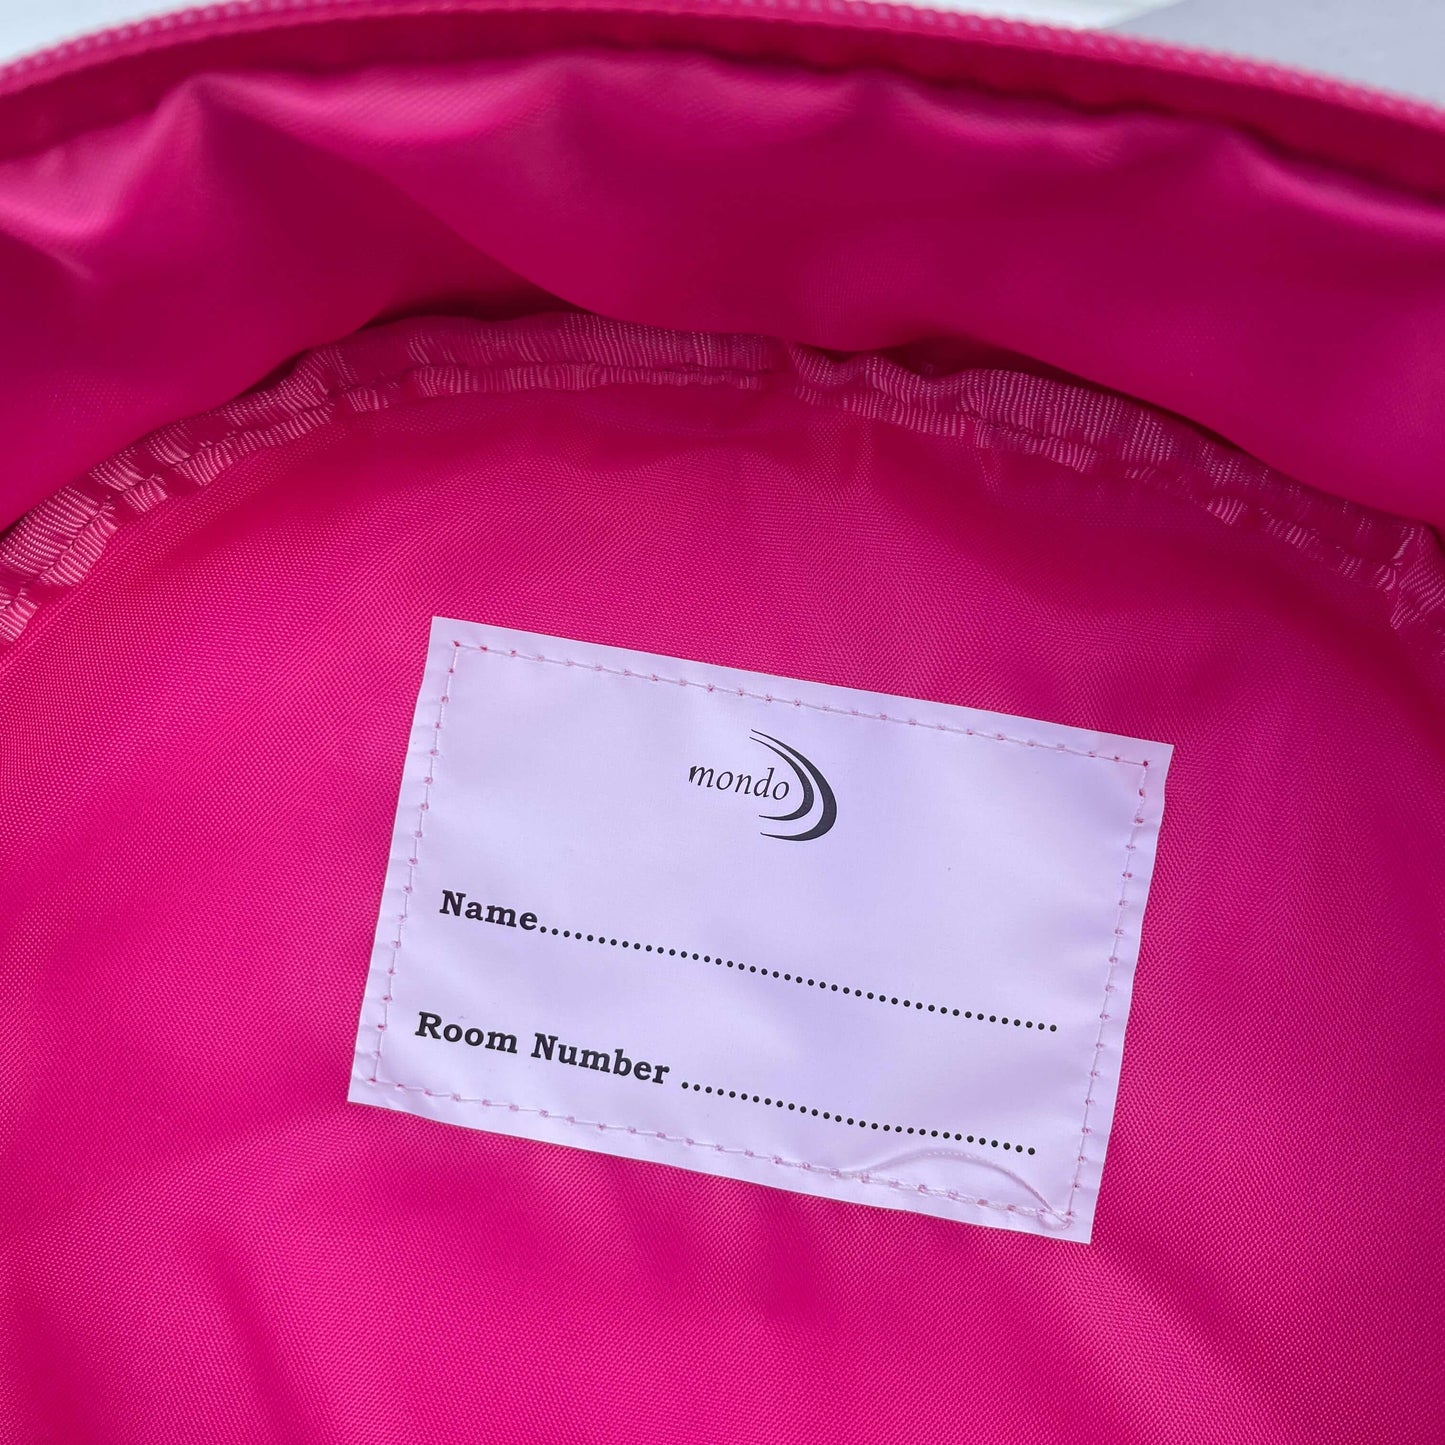 Inside a bright pink backpack showing name label.